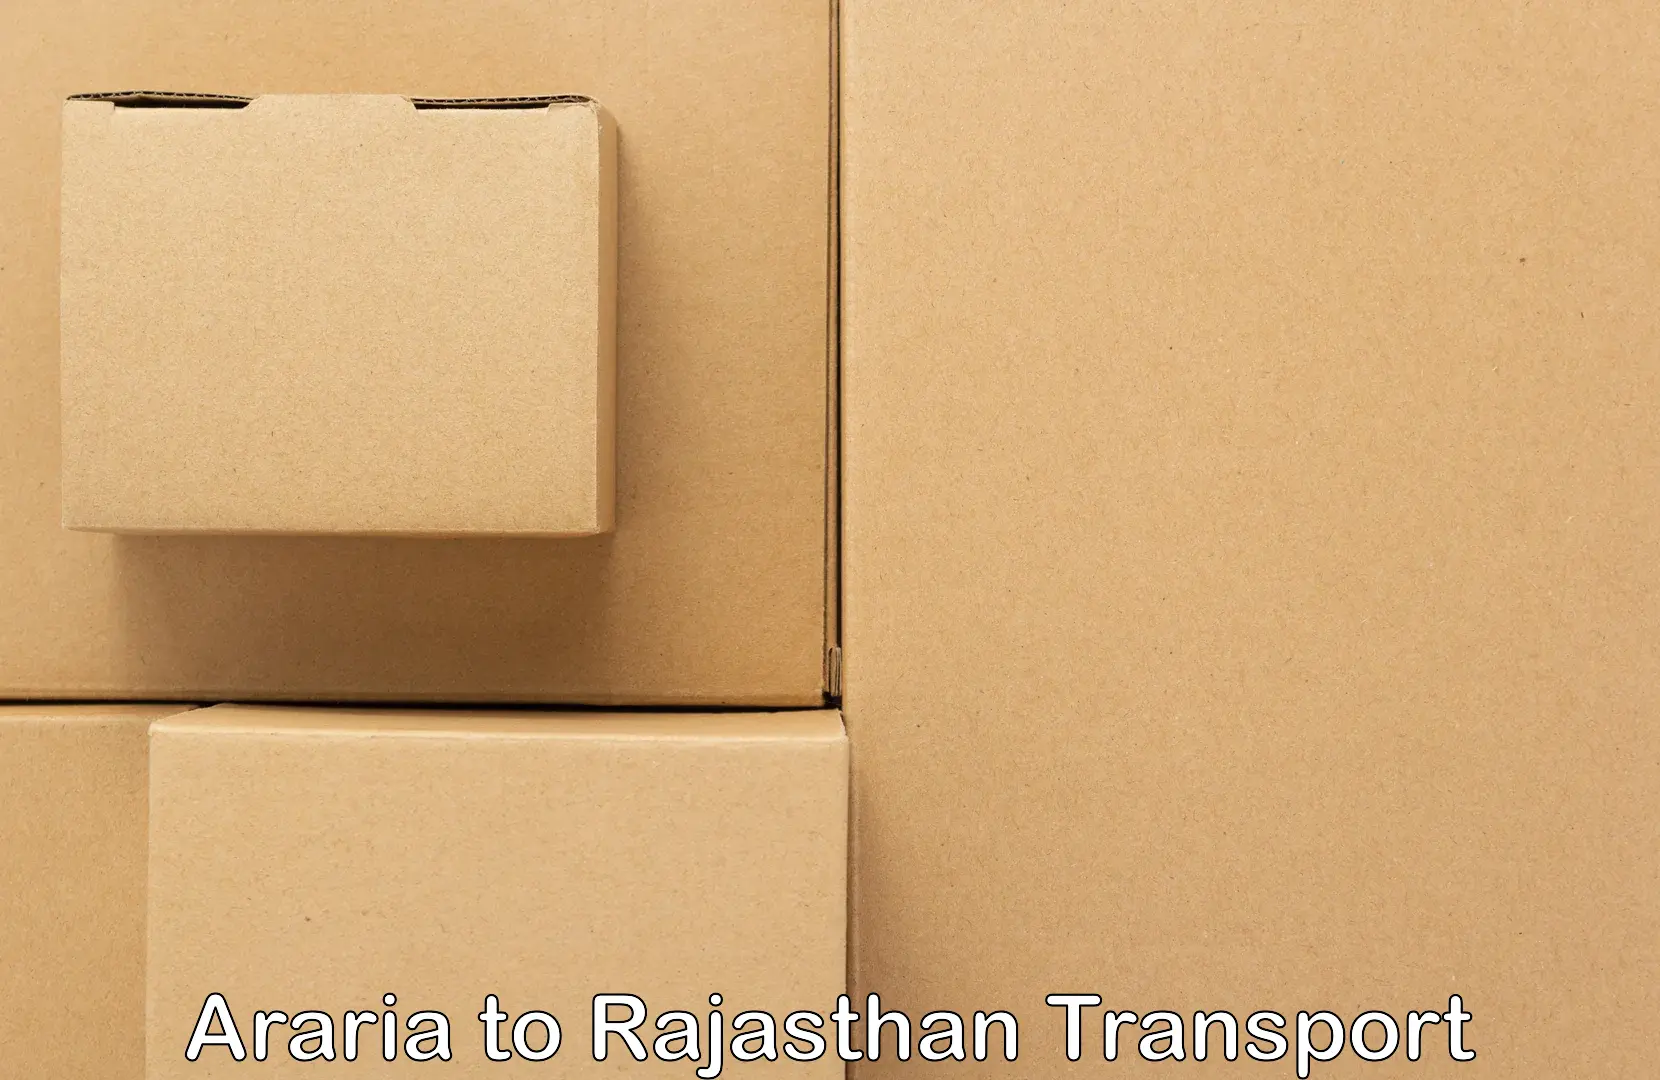 Daily transport service Araria to Jaipur